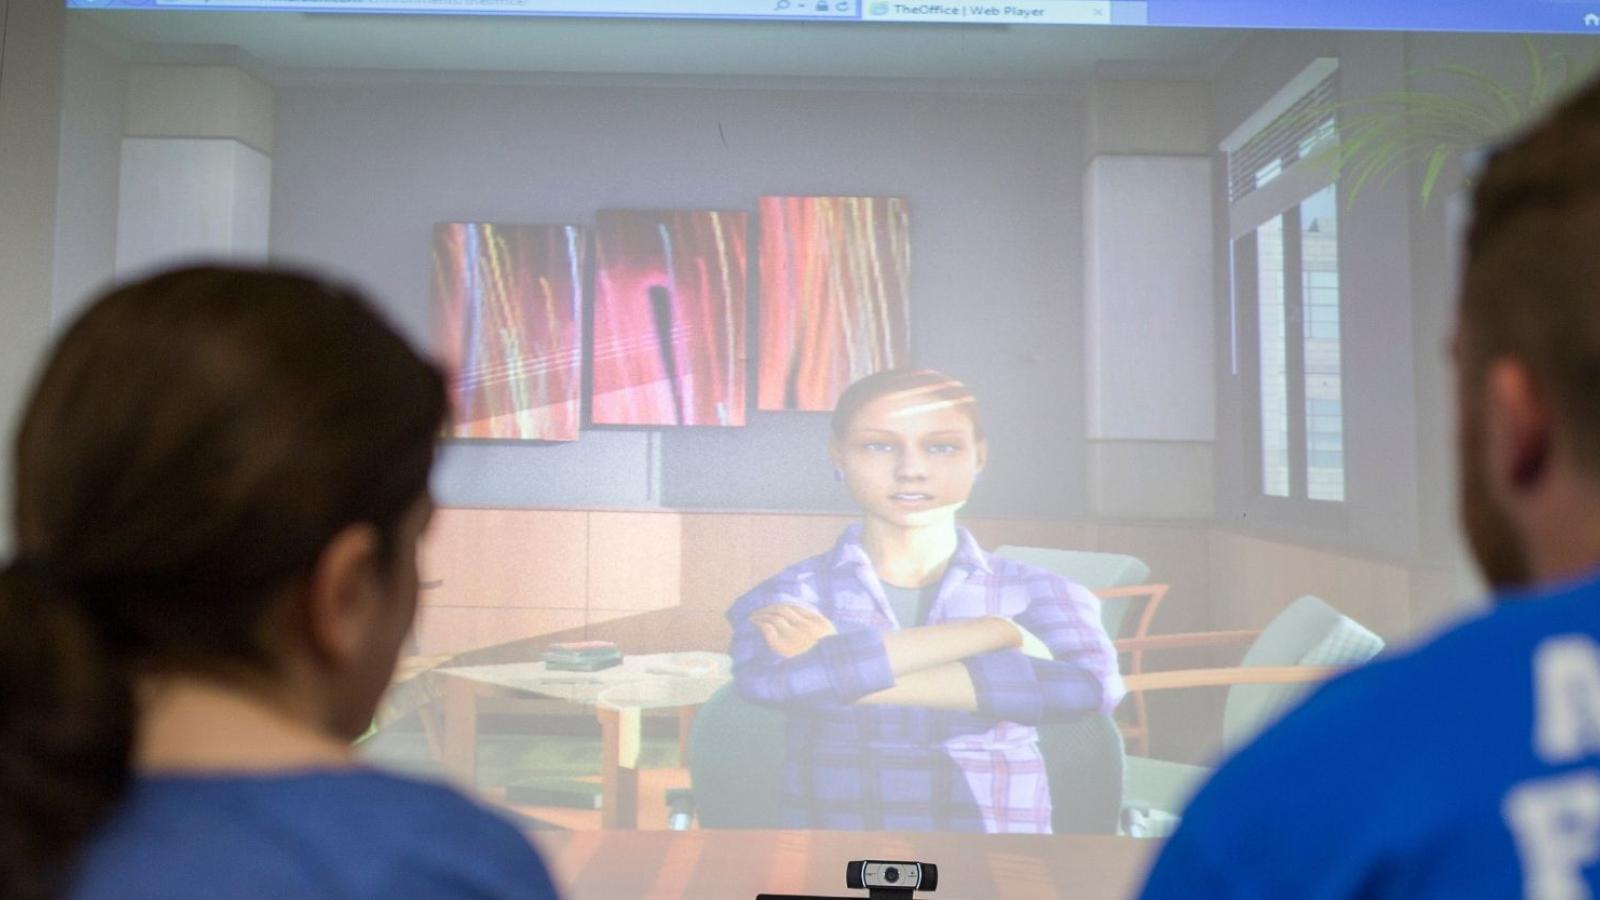 Students interacting with classroom simulation technology